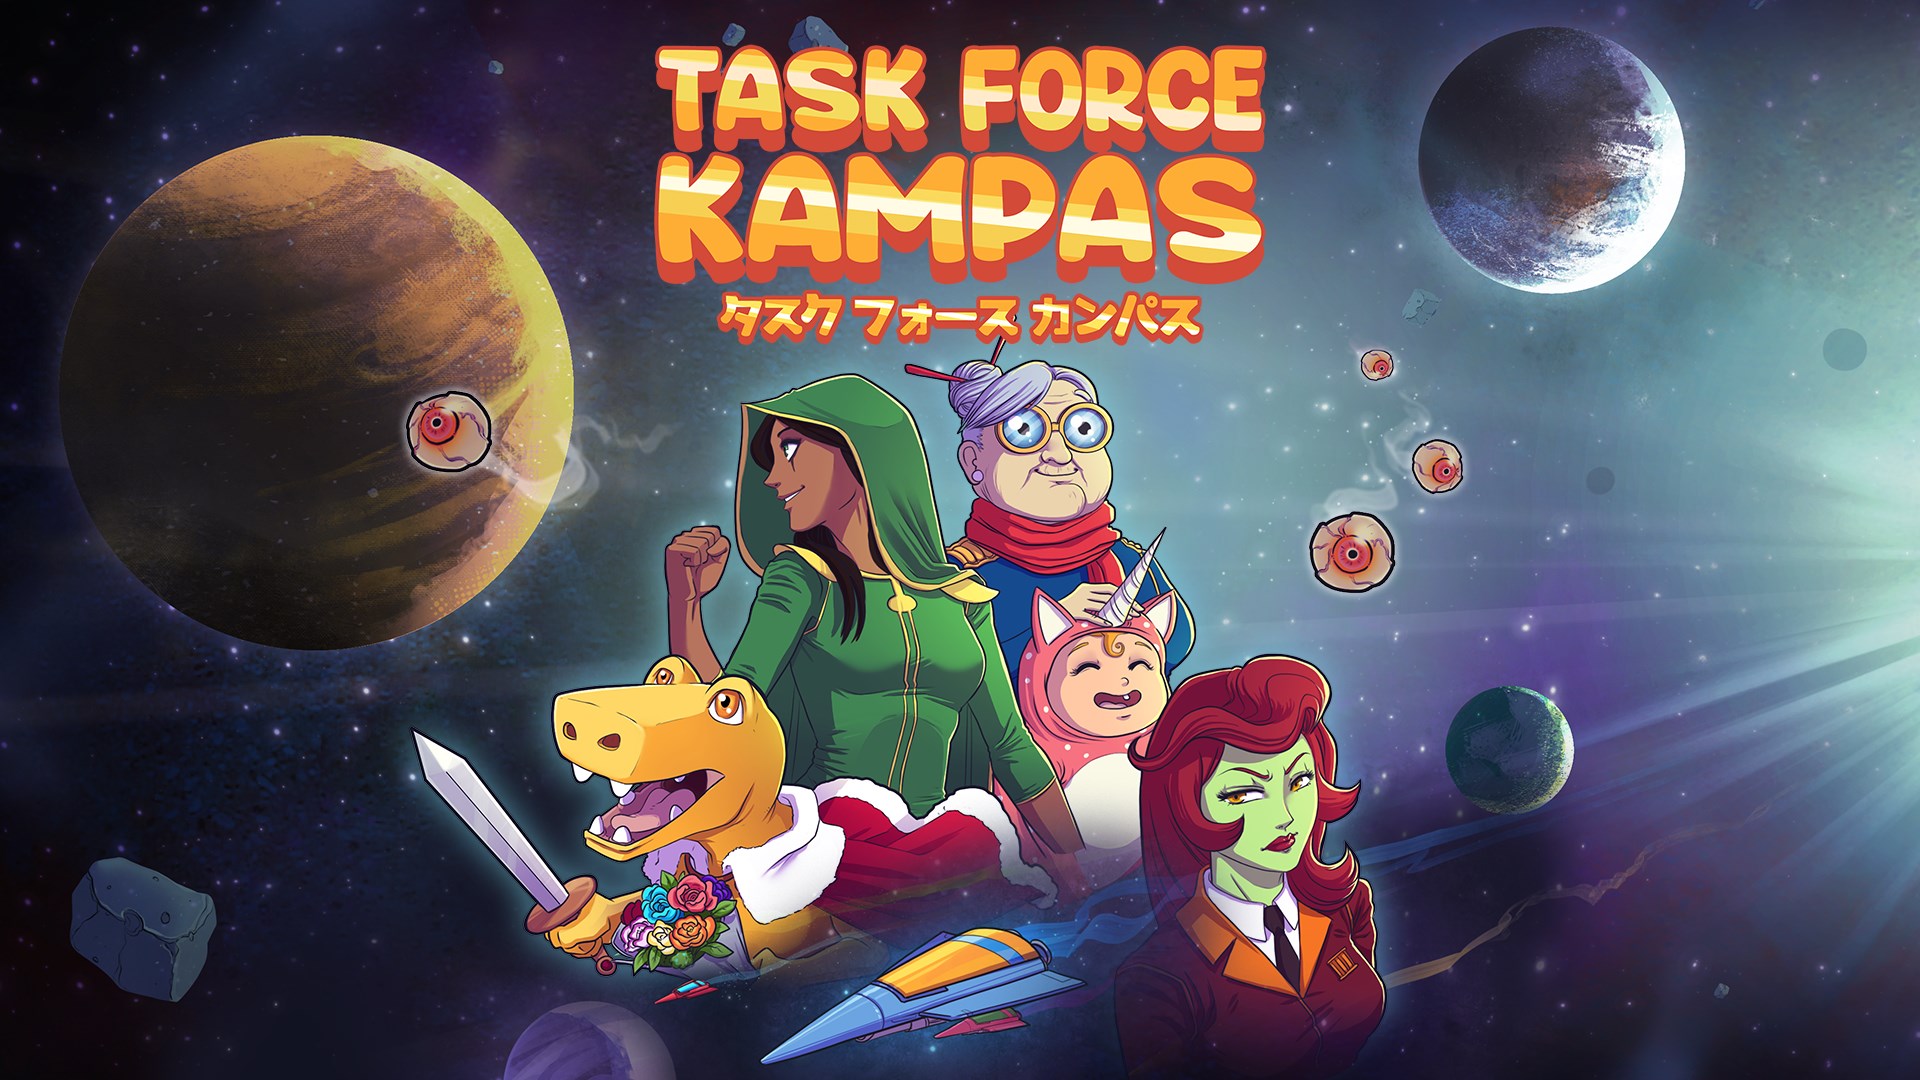 Video For Task Force Kampas Is Now Available For Xbox One